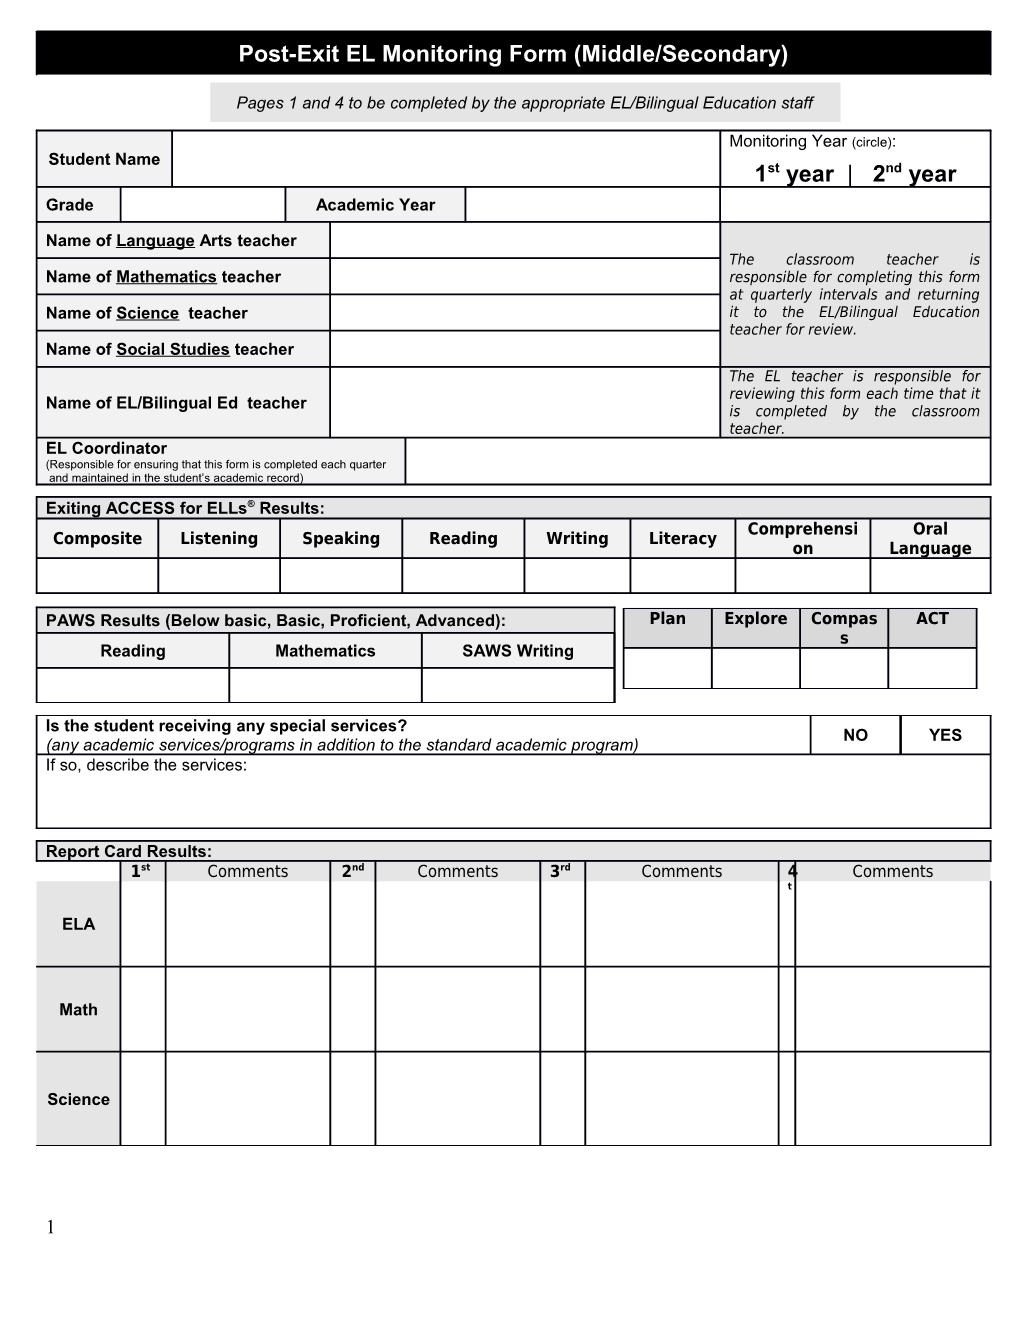 Post-Exit ELL Monitoring Form (Middle/Secondary)